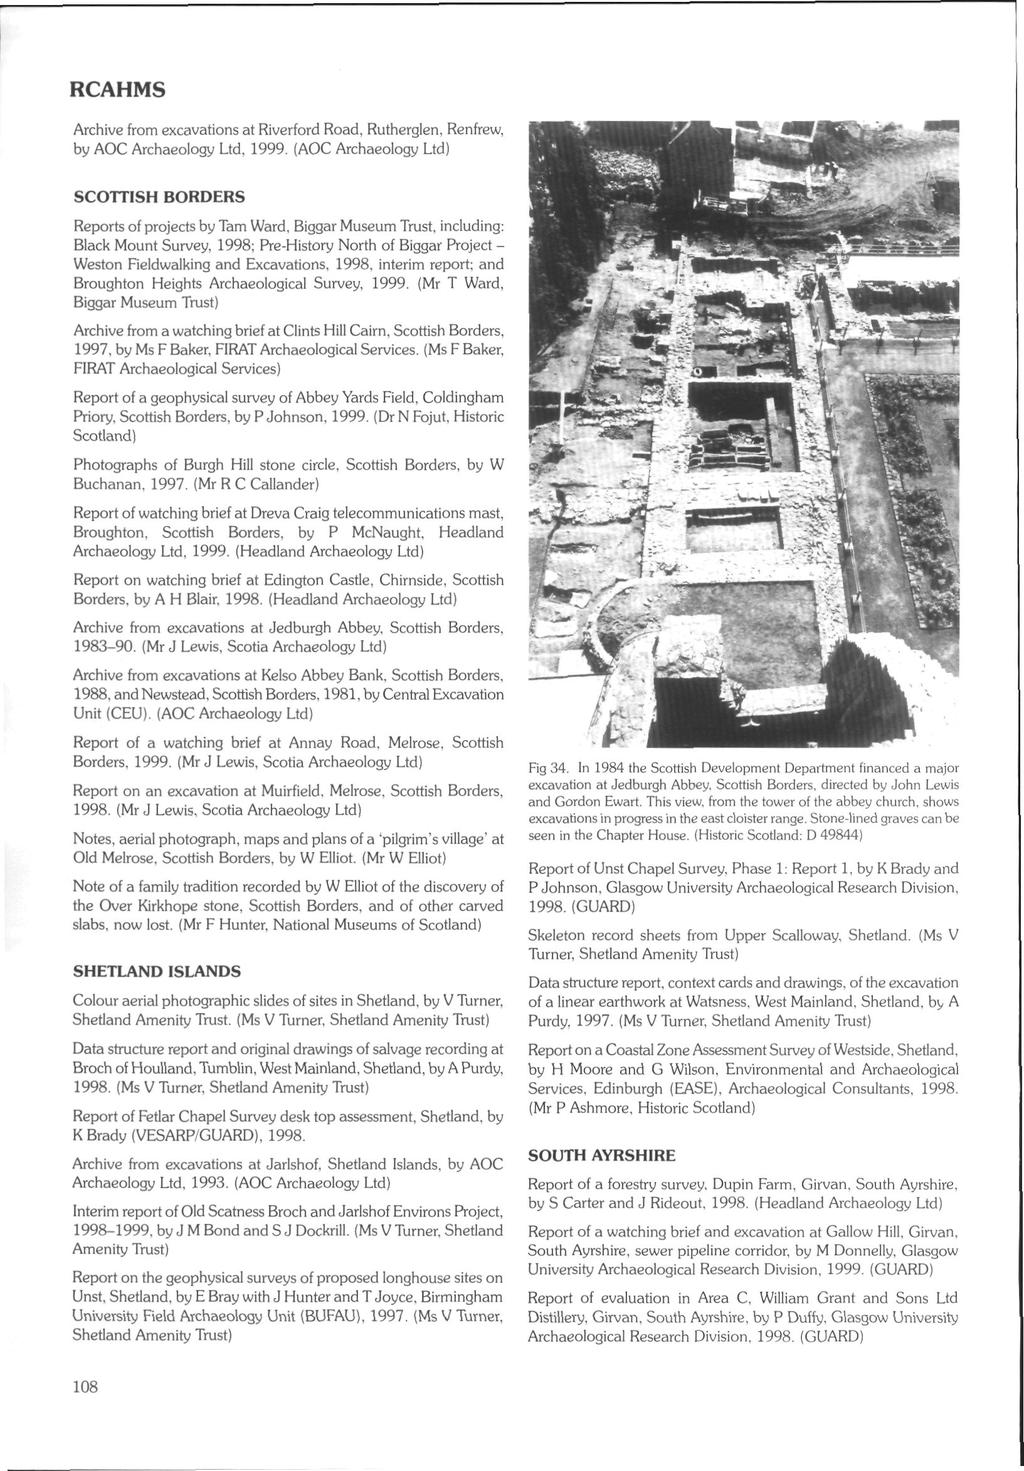 RCAHMS Archive from excavations at Riverford Road, Rutherglen, Renfrew, by AOC Archaeology Ltd, 1999.